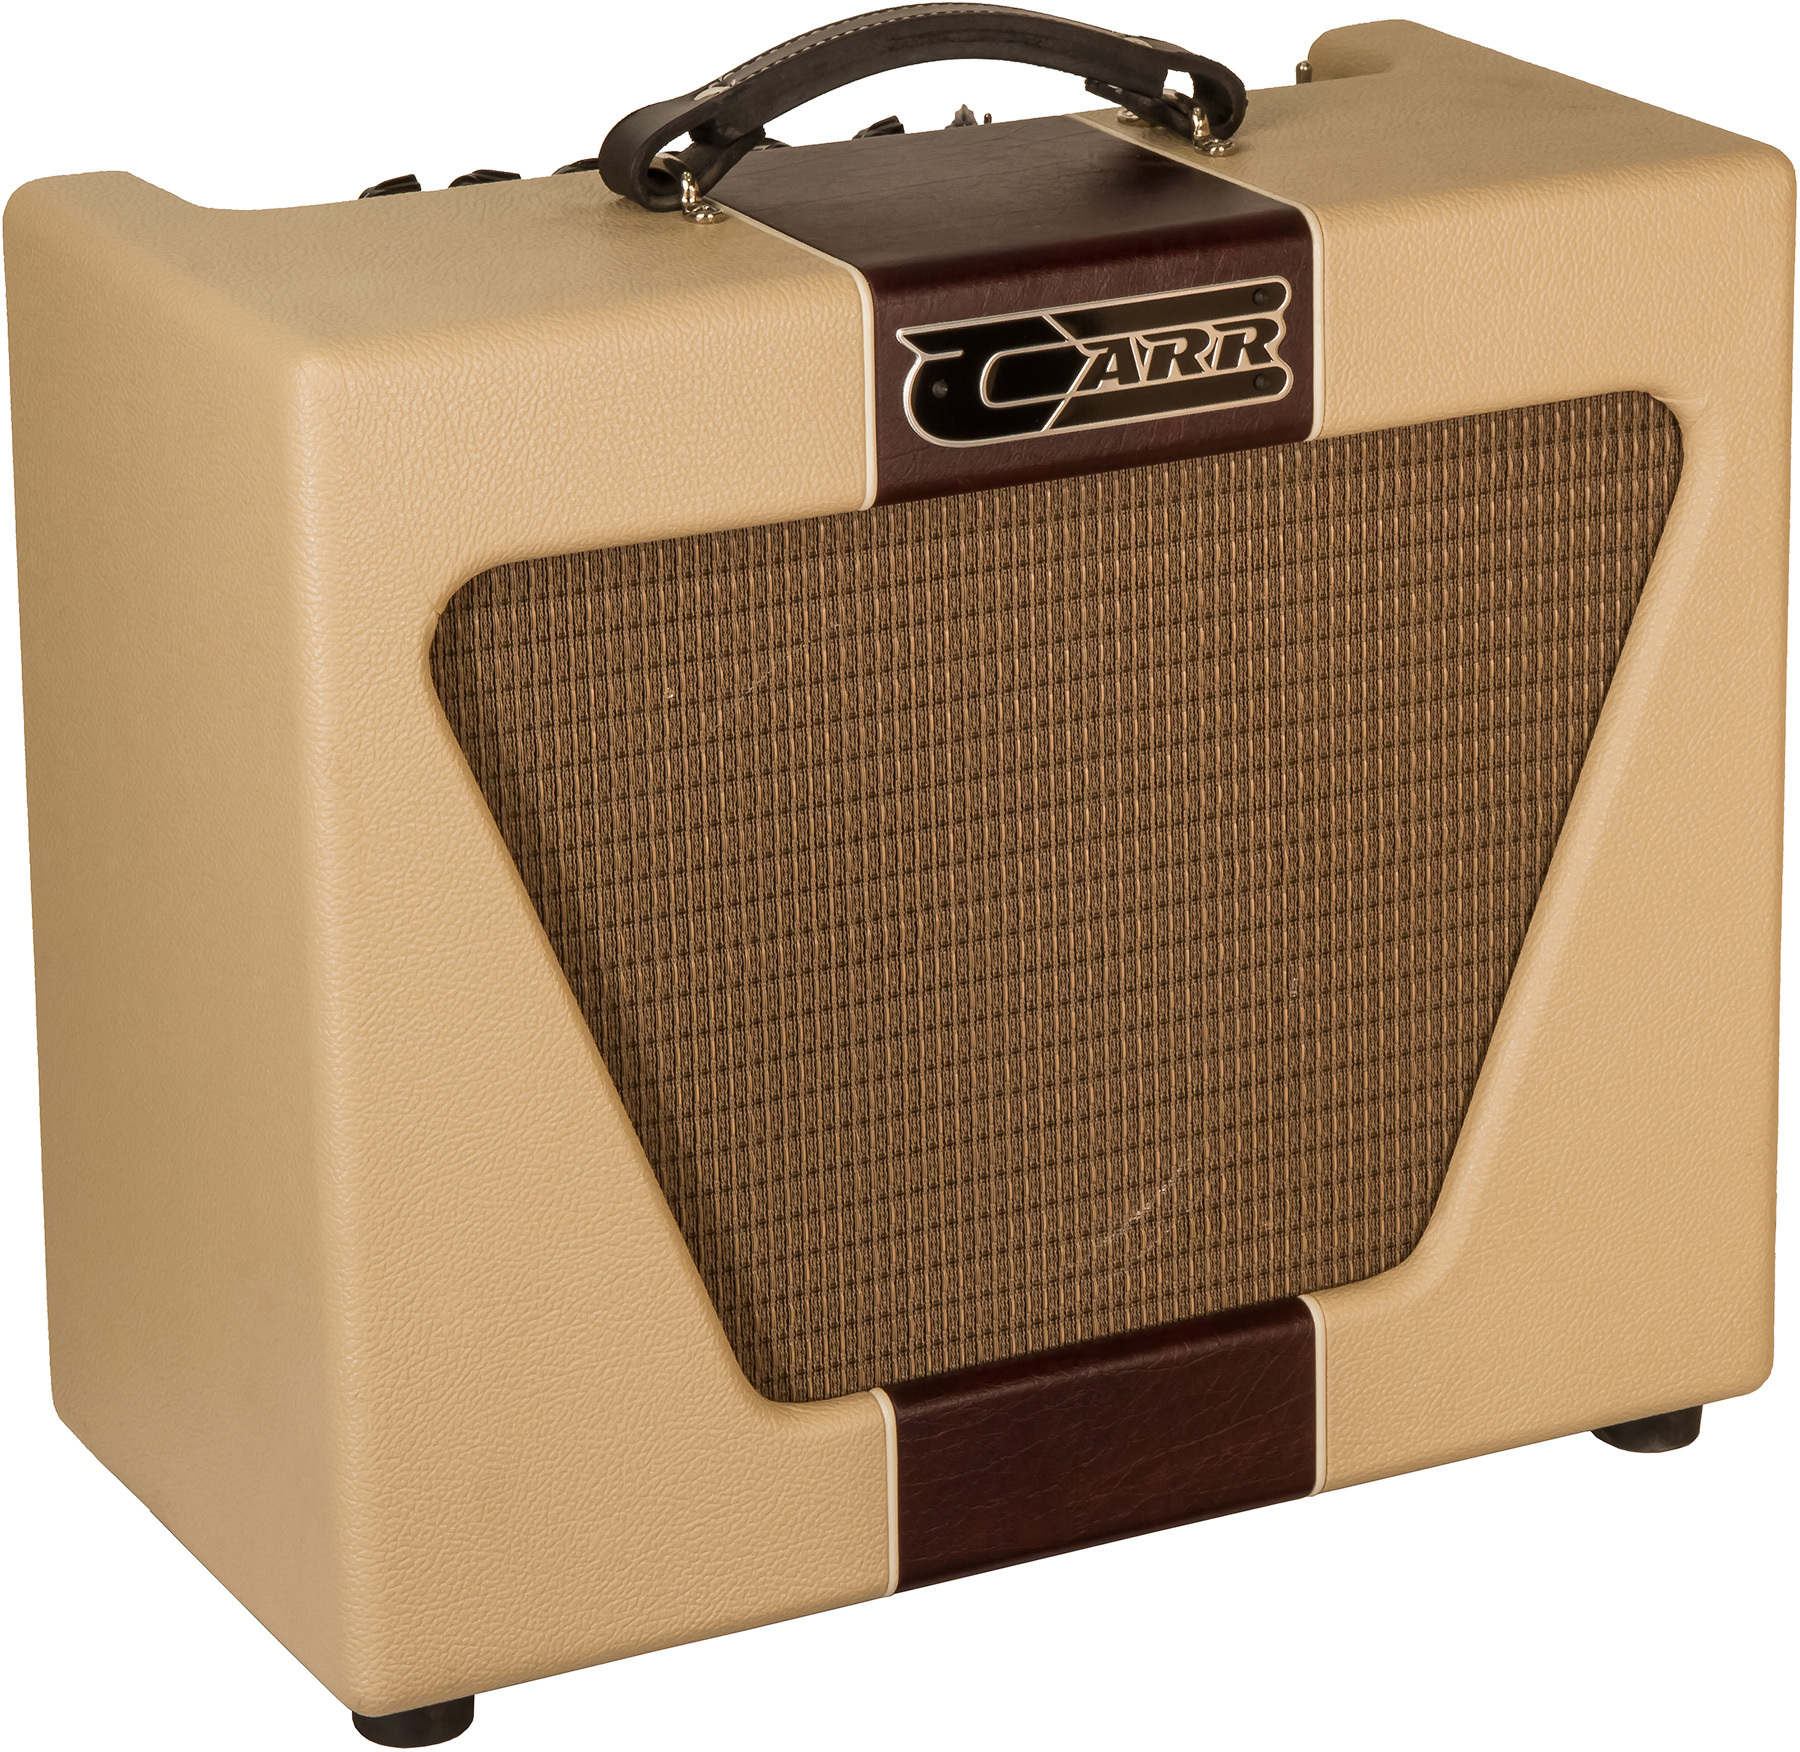 Carr Amplifiers Super Bee 1-12 Combo 10w 1x12 Cream/wine - Electric guitar combo amp - Main picture